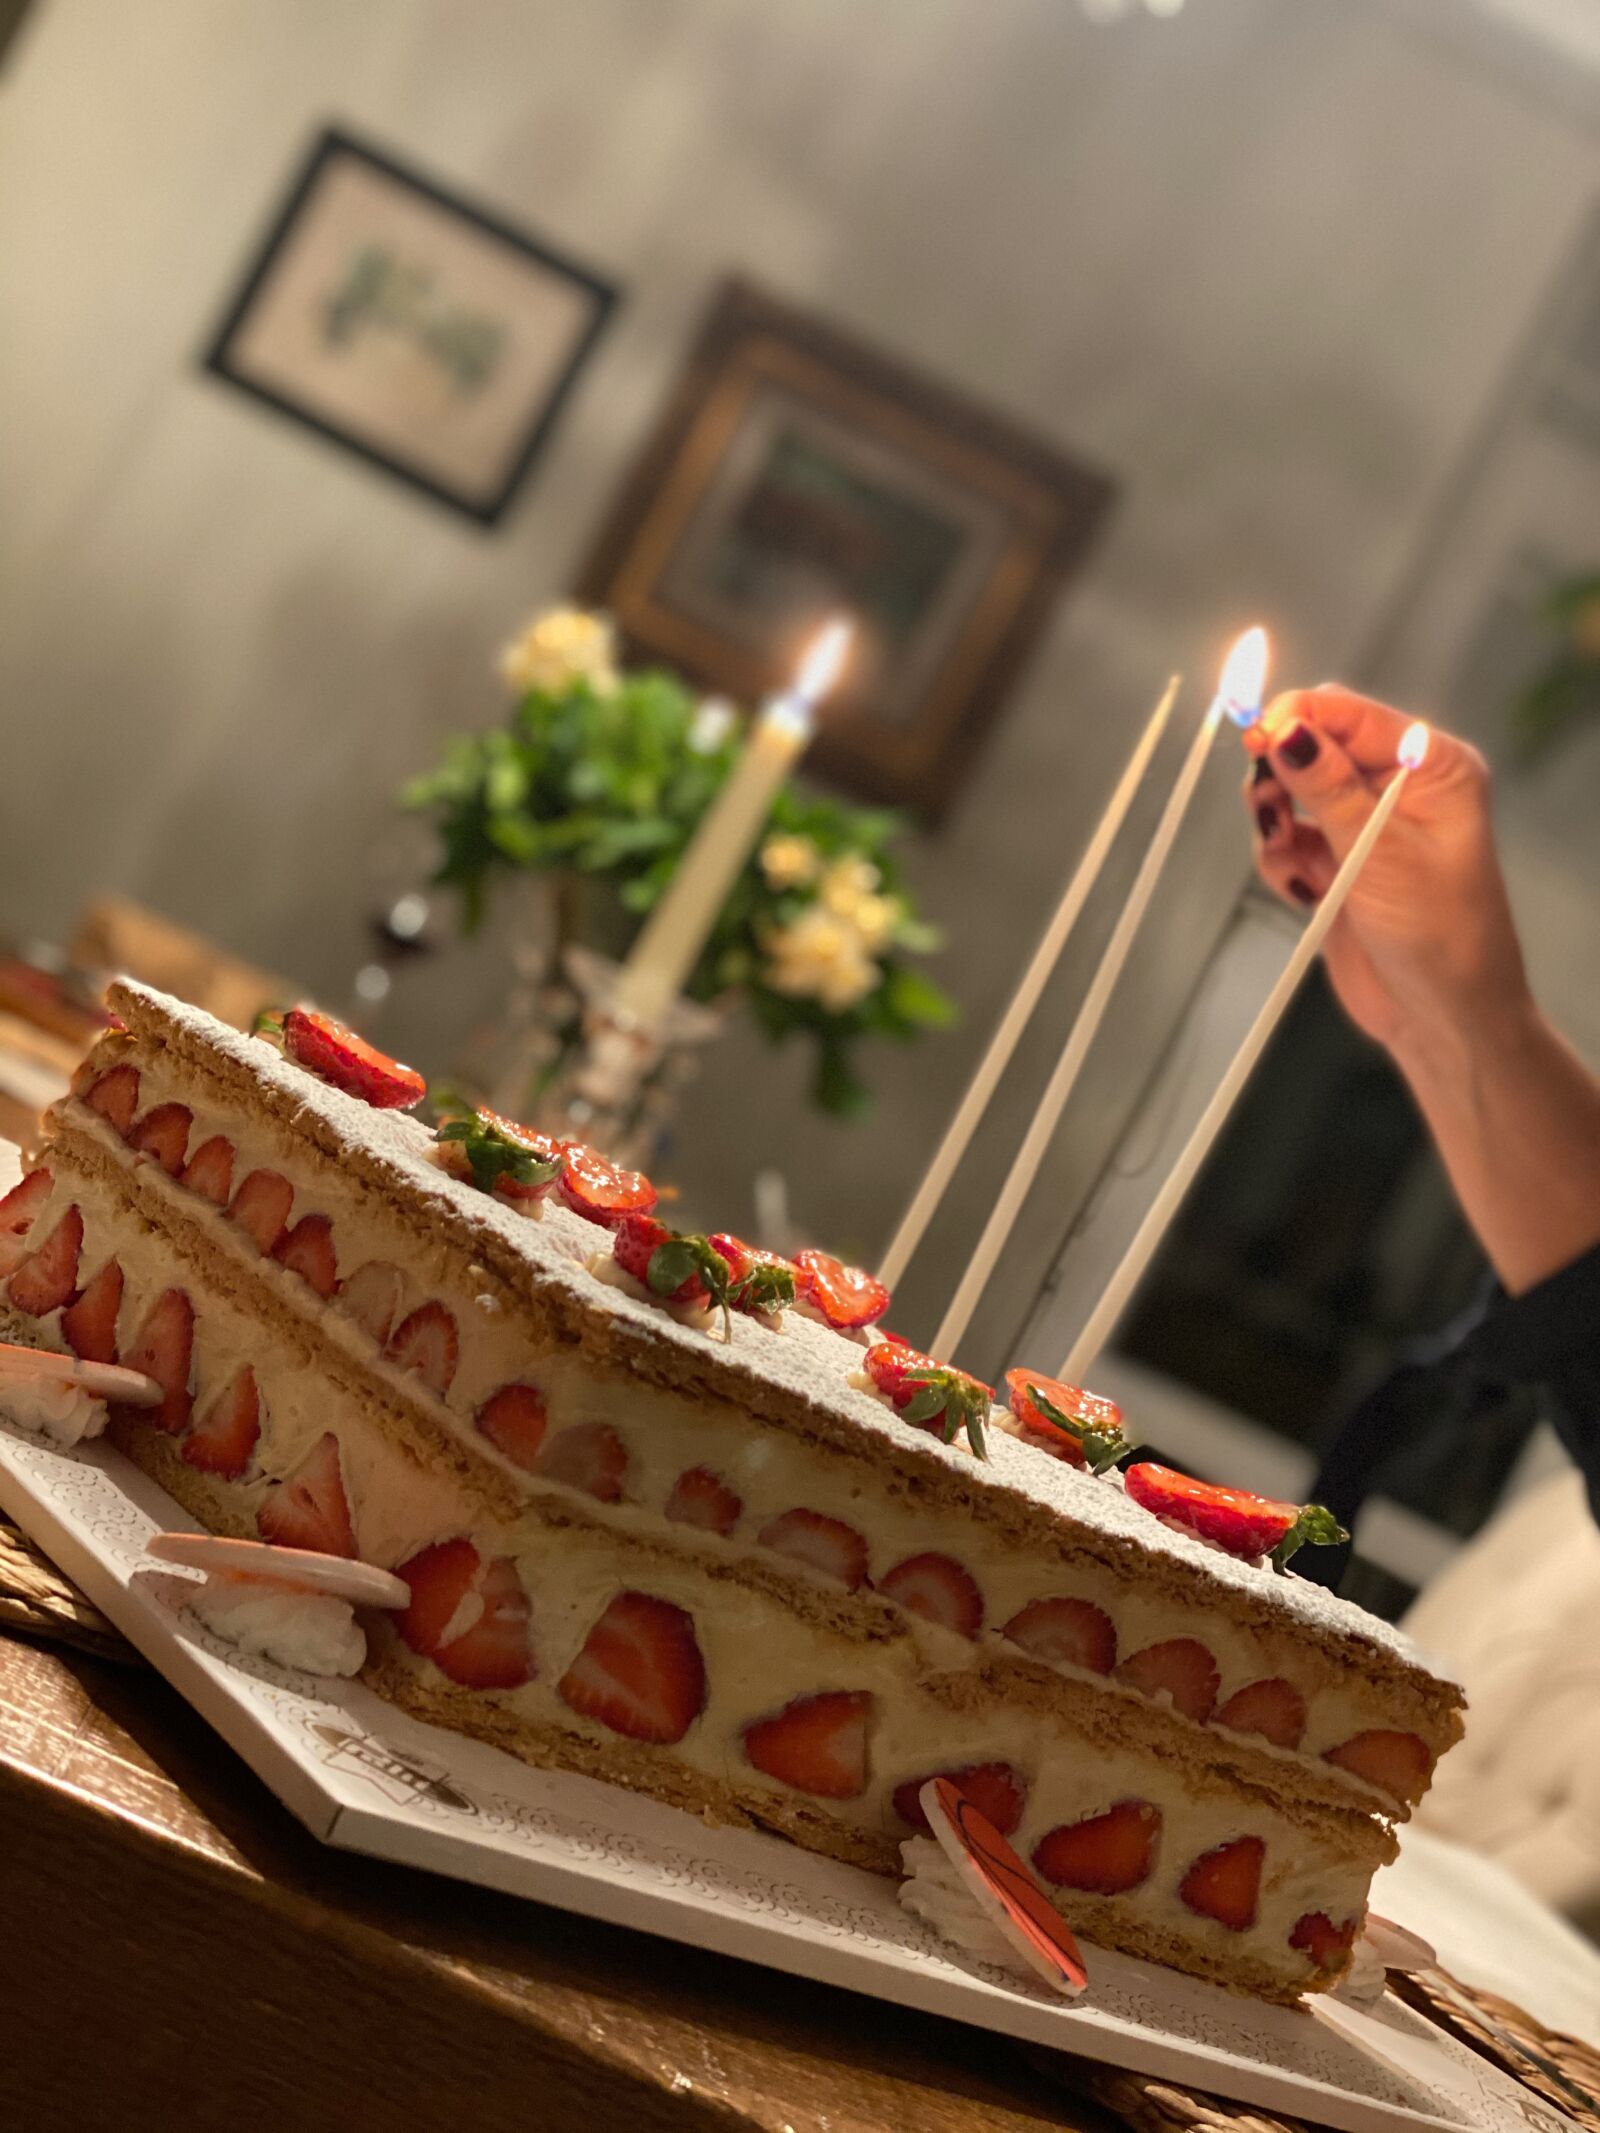 Apple iPhone 11 Pro Max + iPhone 11 Pro Max back dual camera 6mm f/2 sample photo. Birthday, cake, candles photography